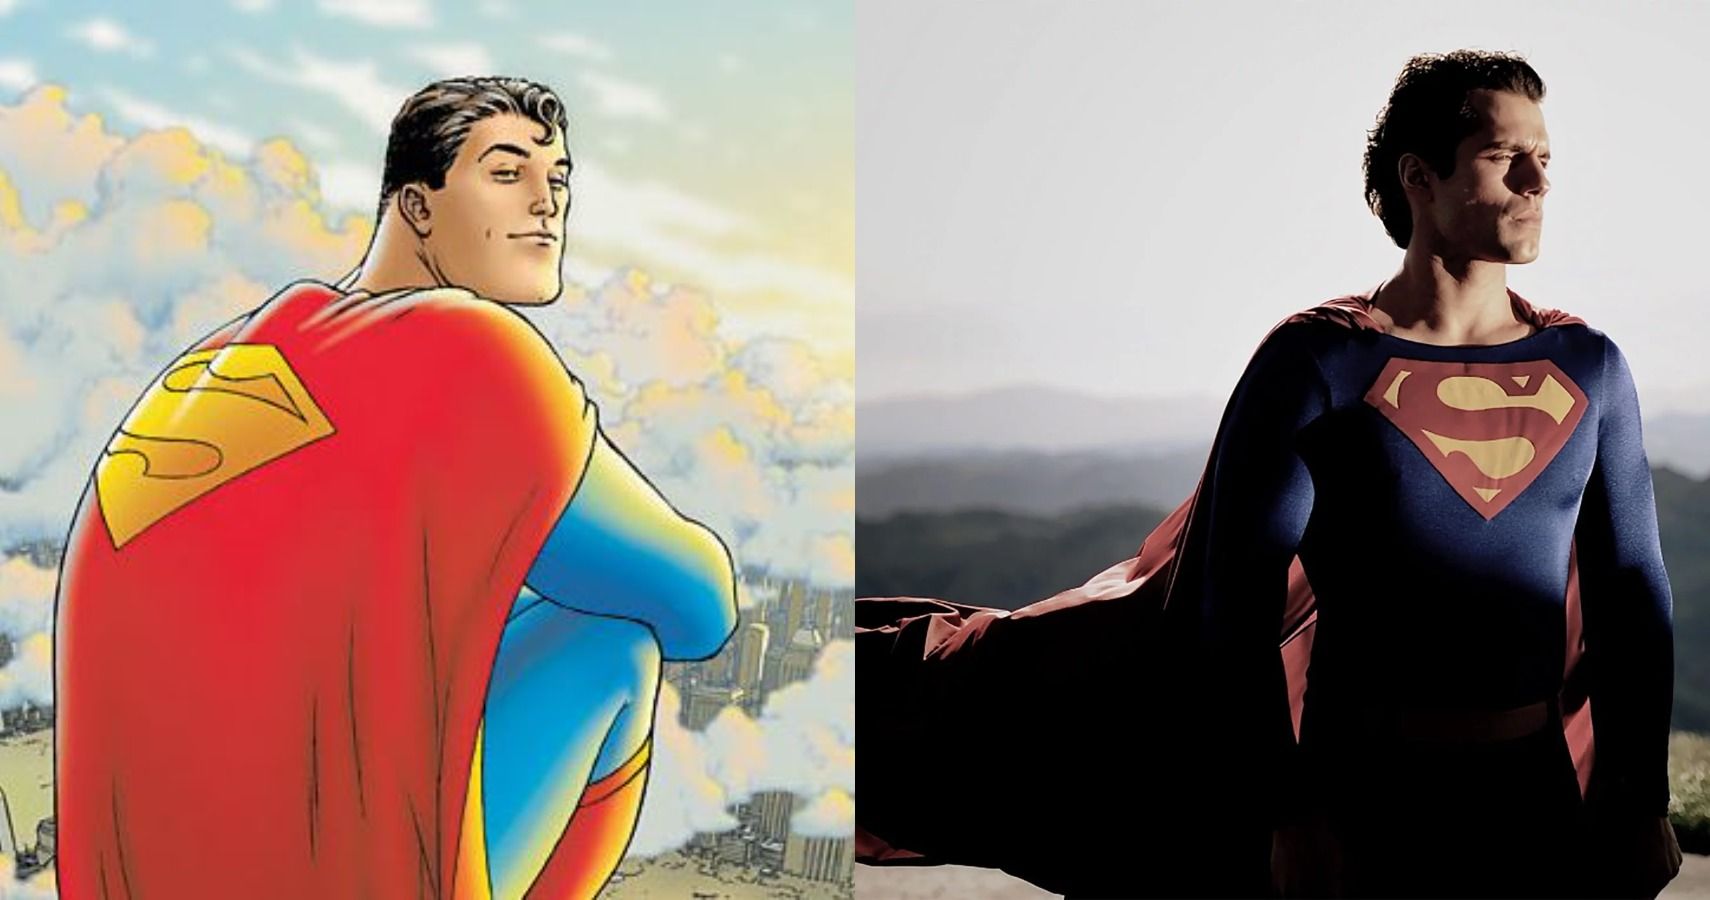 Saw all star Superman's movie adaptation. Comic had more content